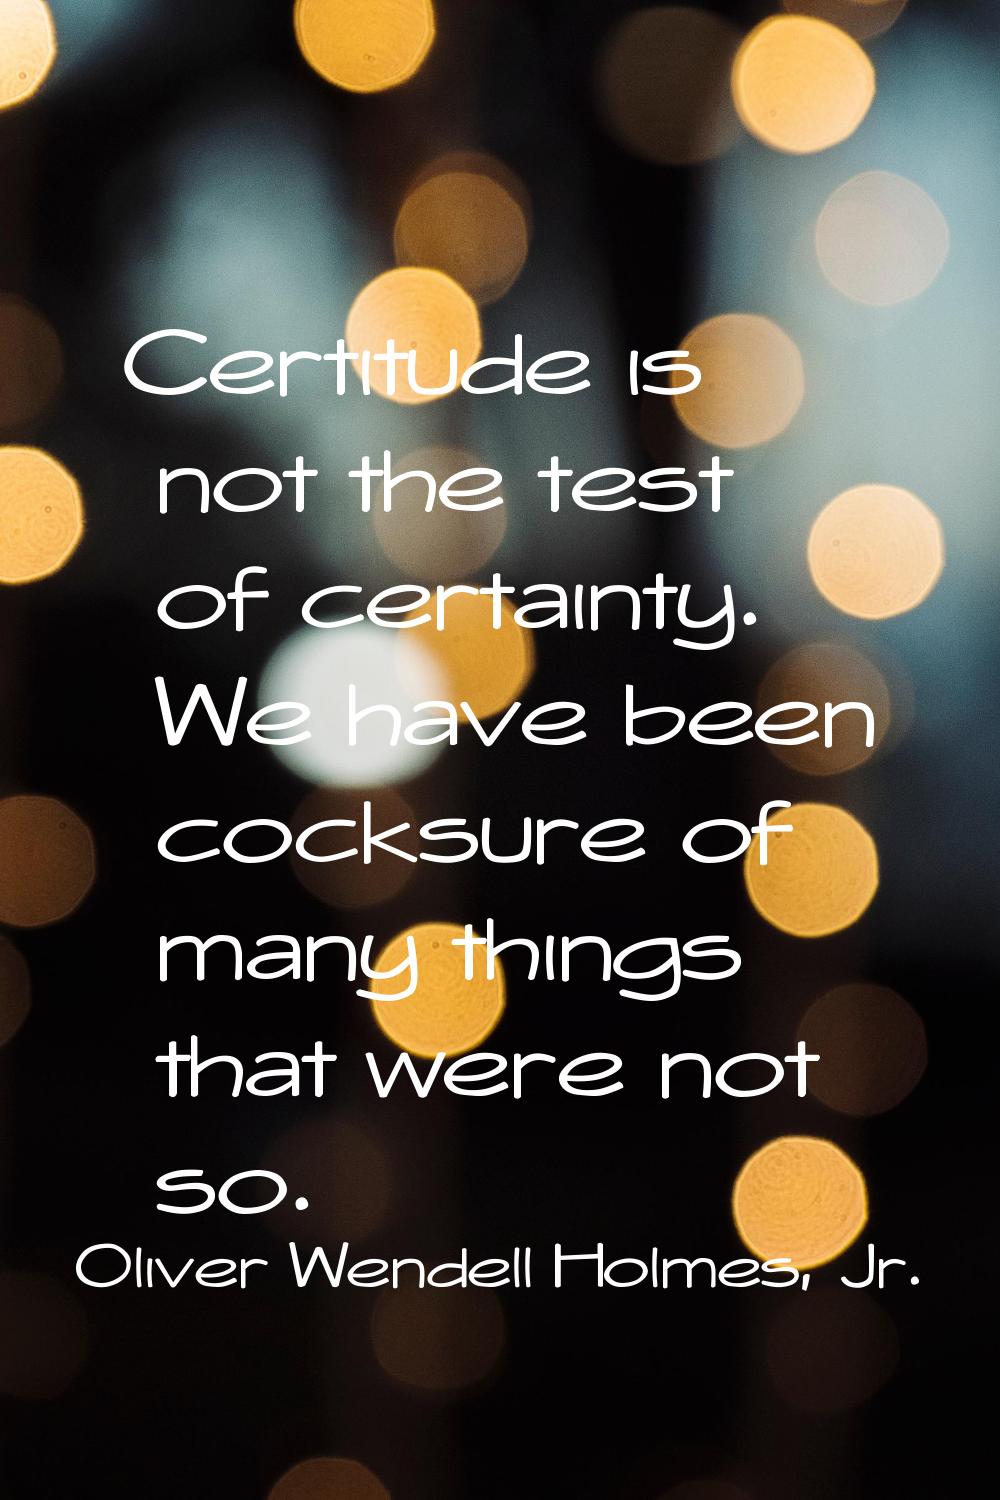 Certitude is not the test of certainty. We have been cocksure of many things that were not so.